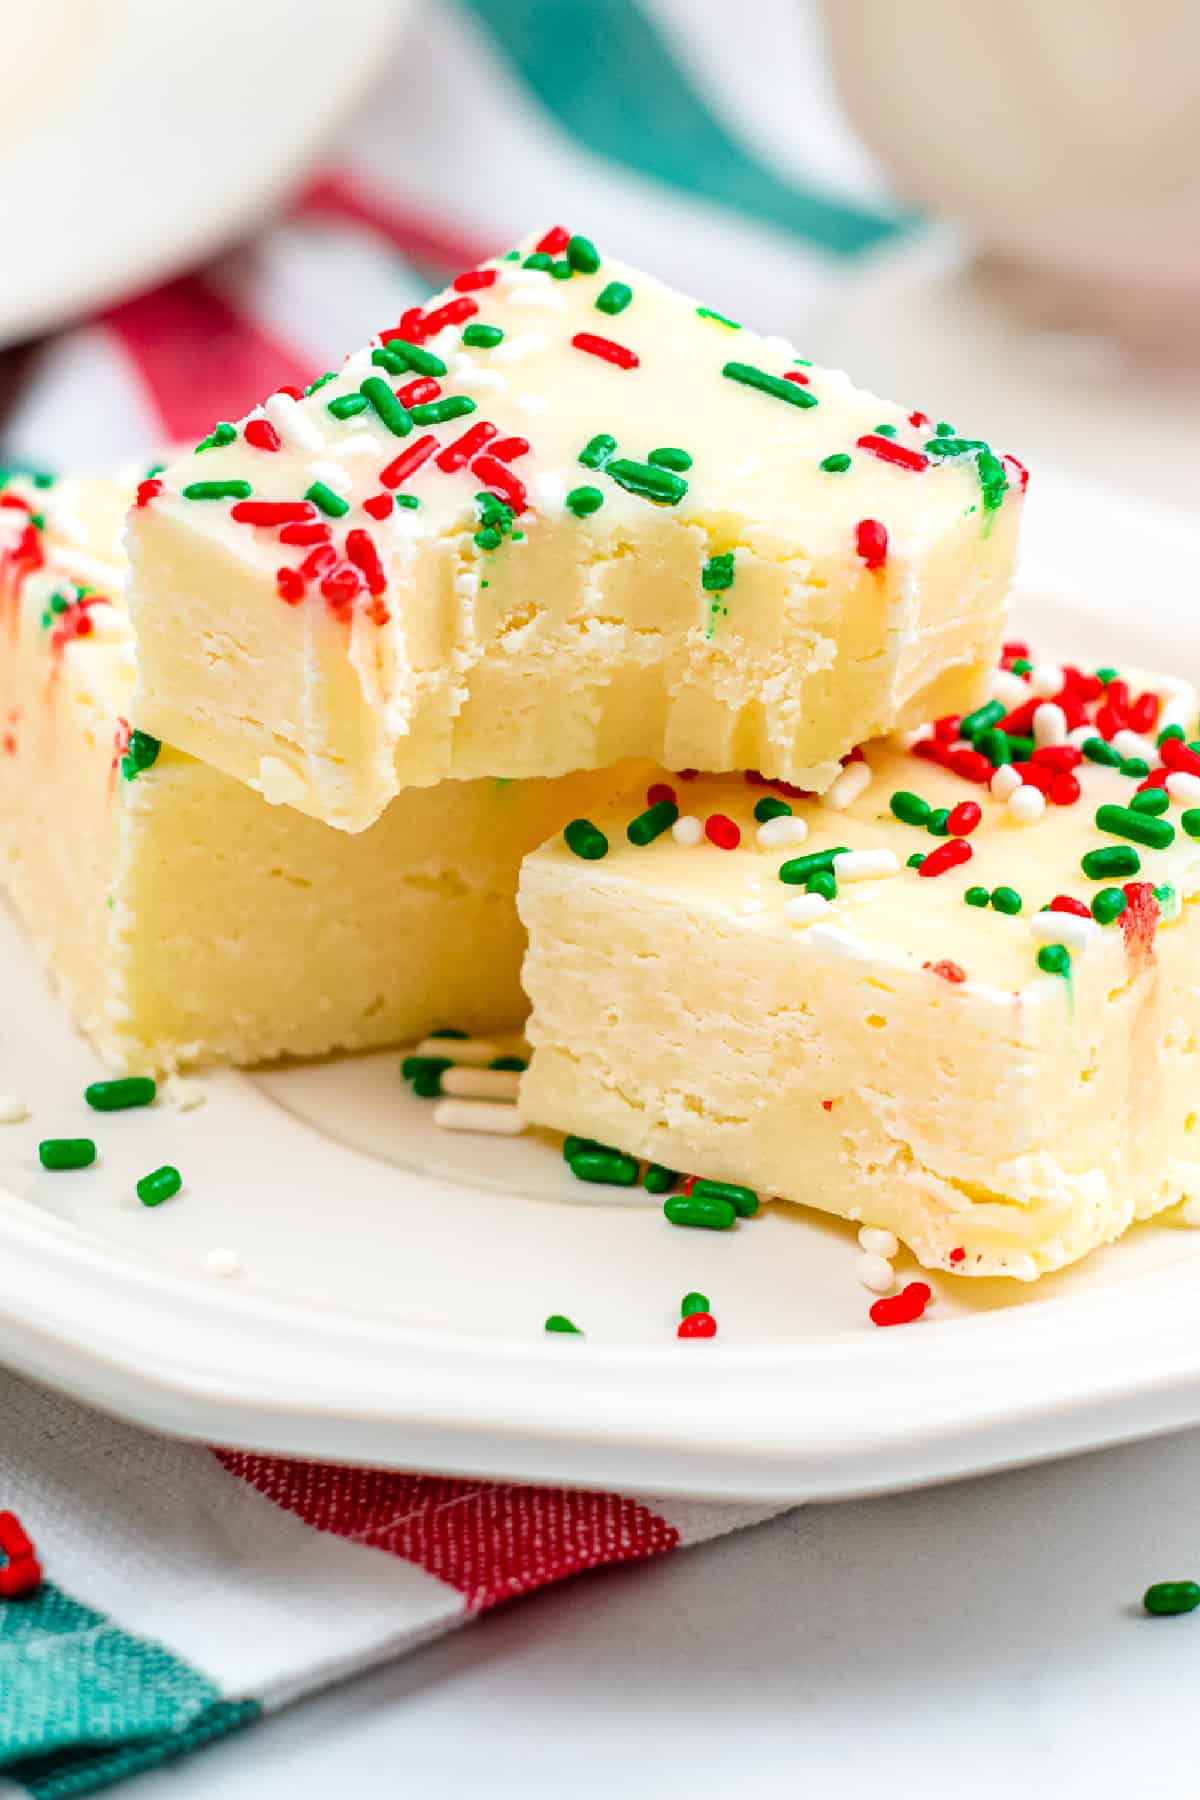 Sugar cookie fudge piled on a plate from the side with the top piece missing a bite.